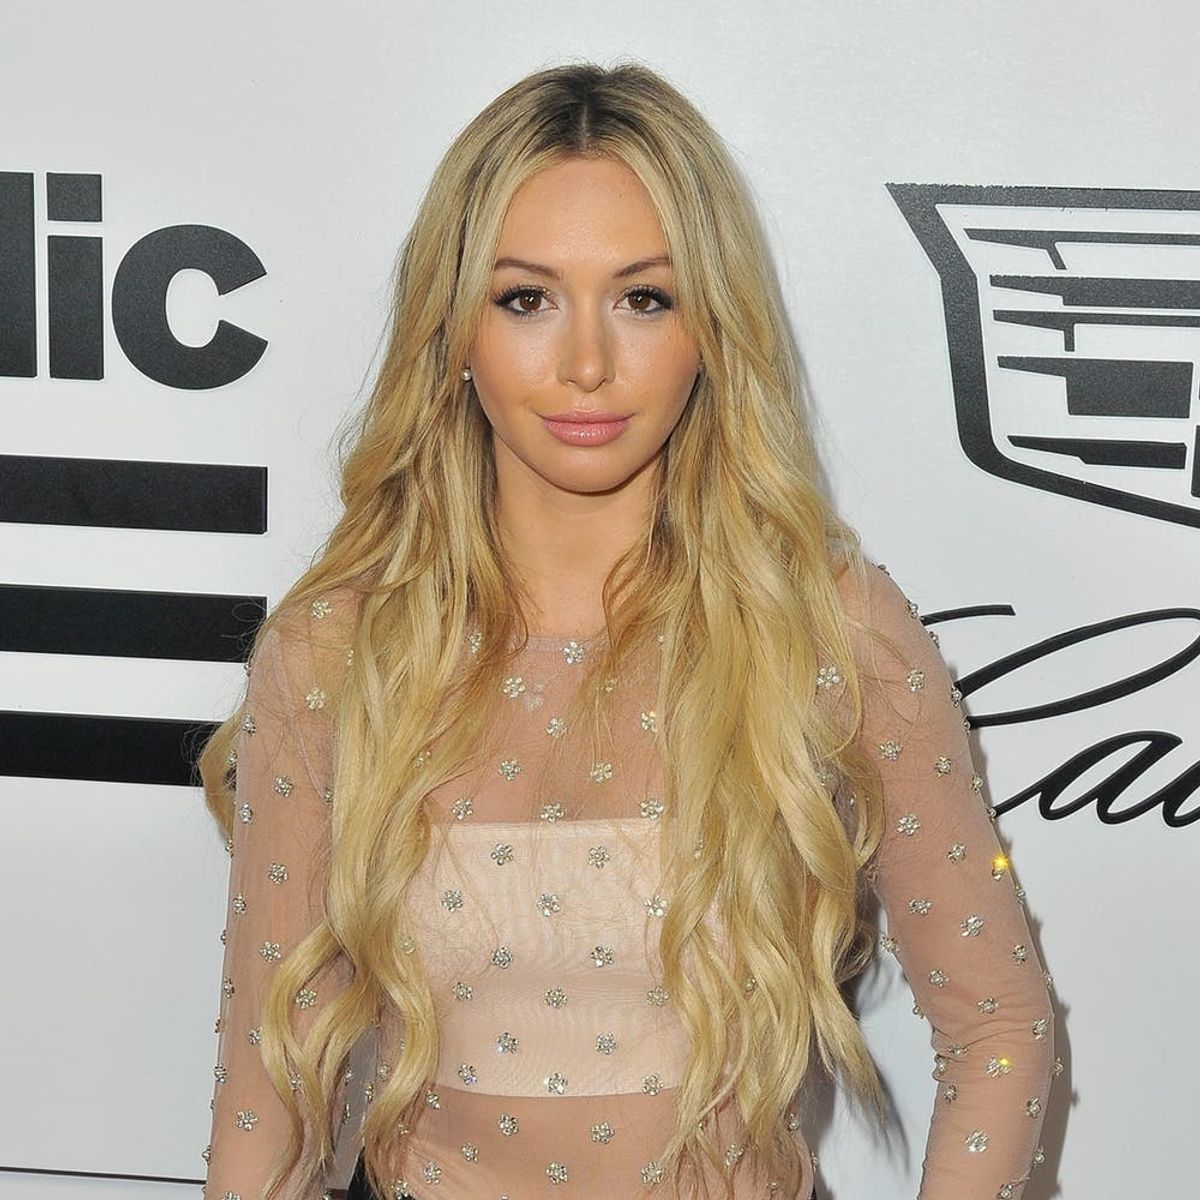 Corinne Olympios Says She’s Dating Someone New: “I’m Really Happy”